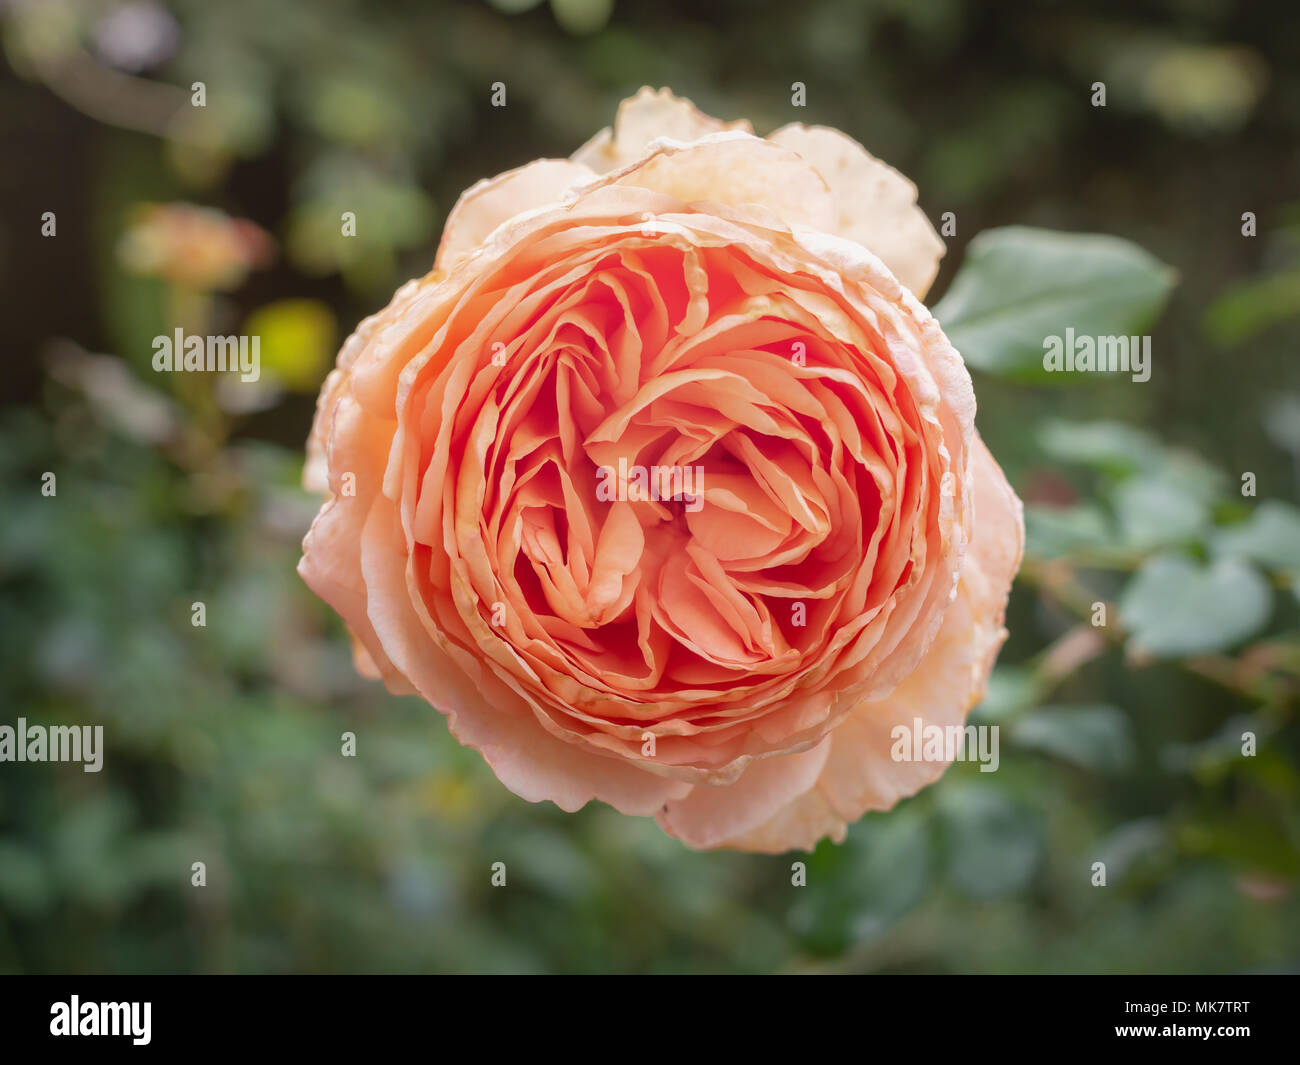 Blooming Flower Close-up, Rosa Centifolia (Rose des Peintres) in Creamy Color in The Graden Stock Photo